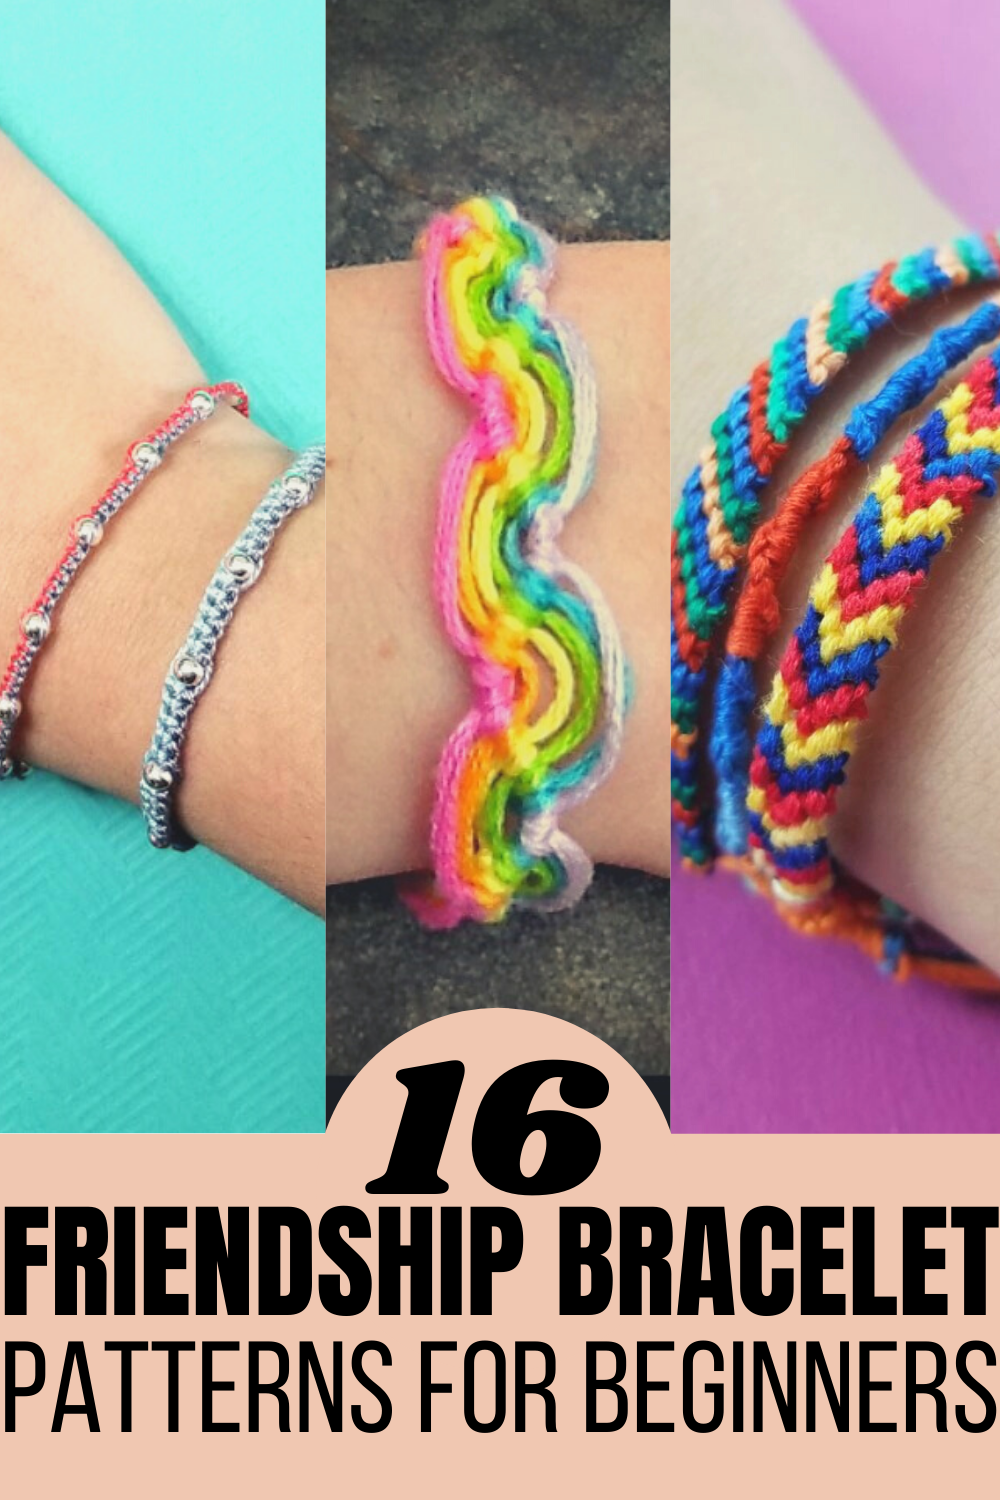 51 Different Types of Friendship Bracelets to Make